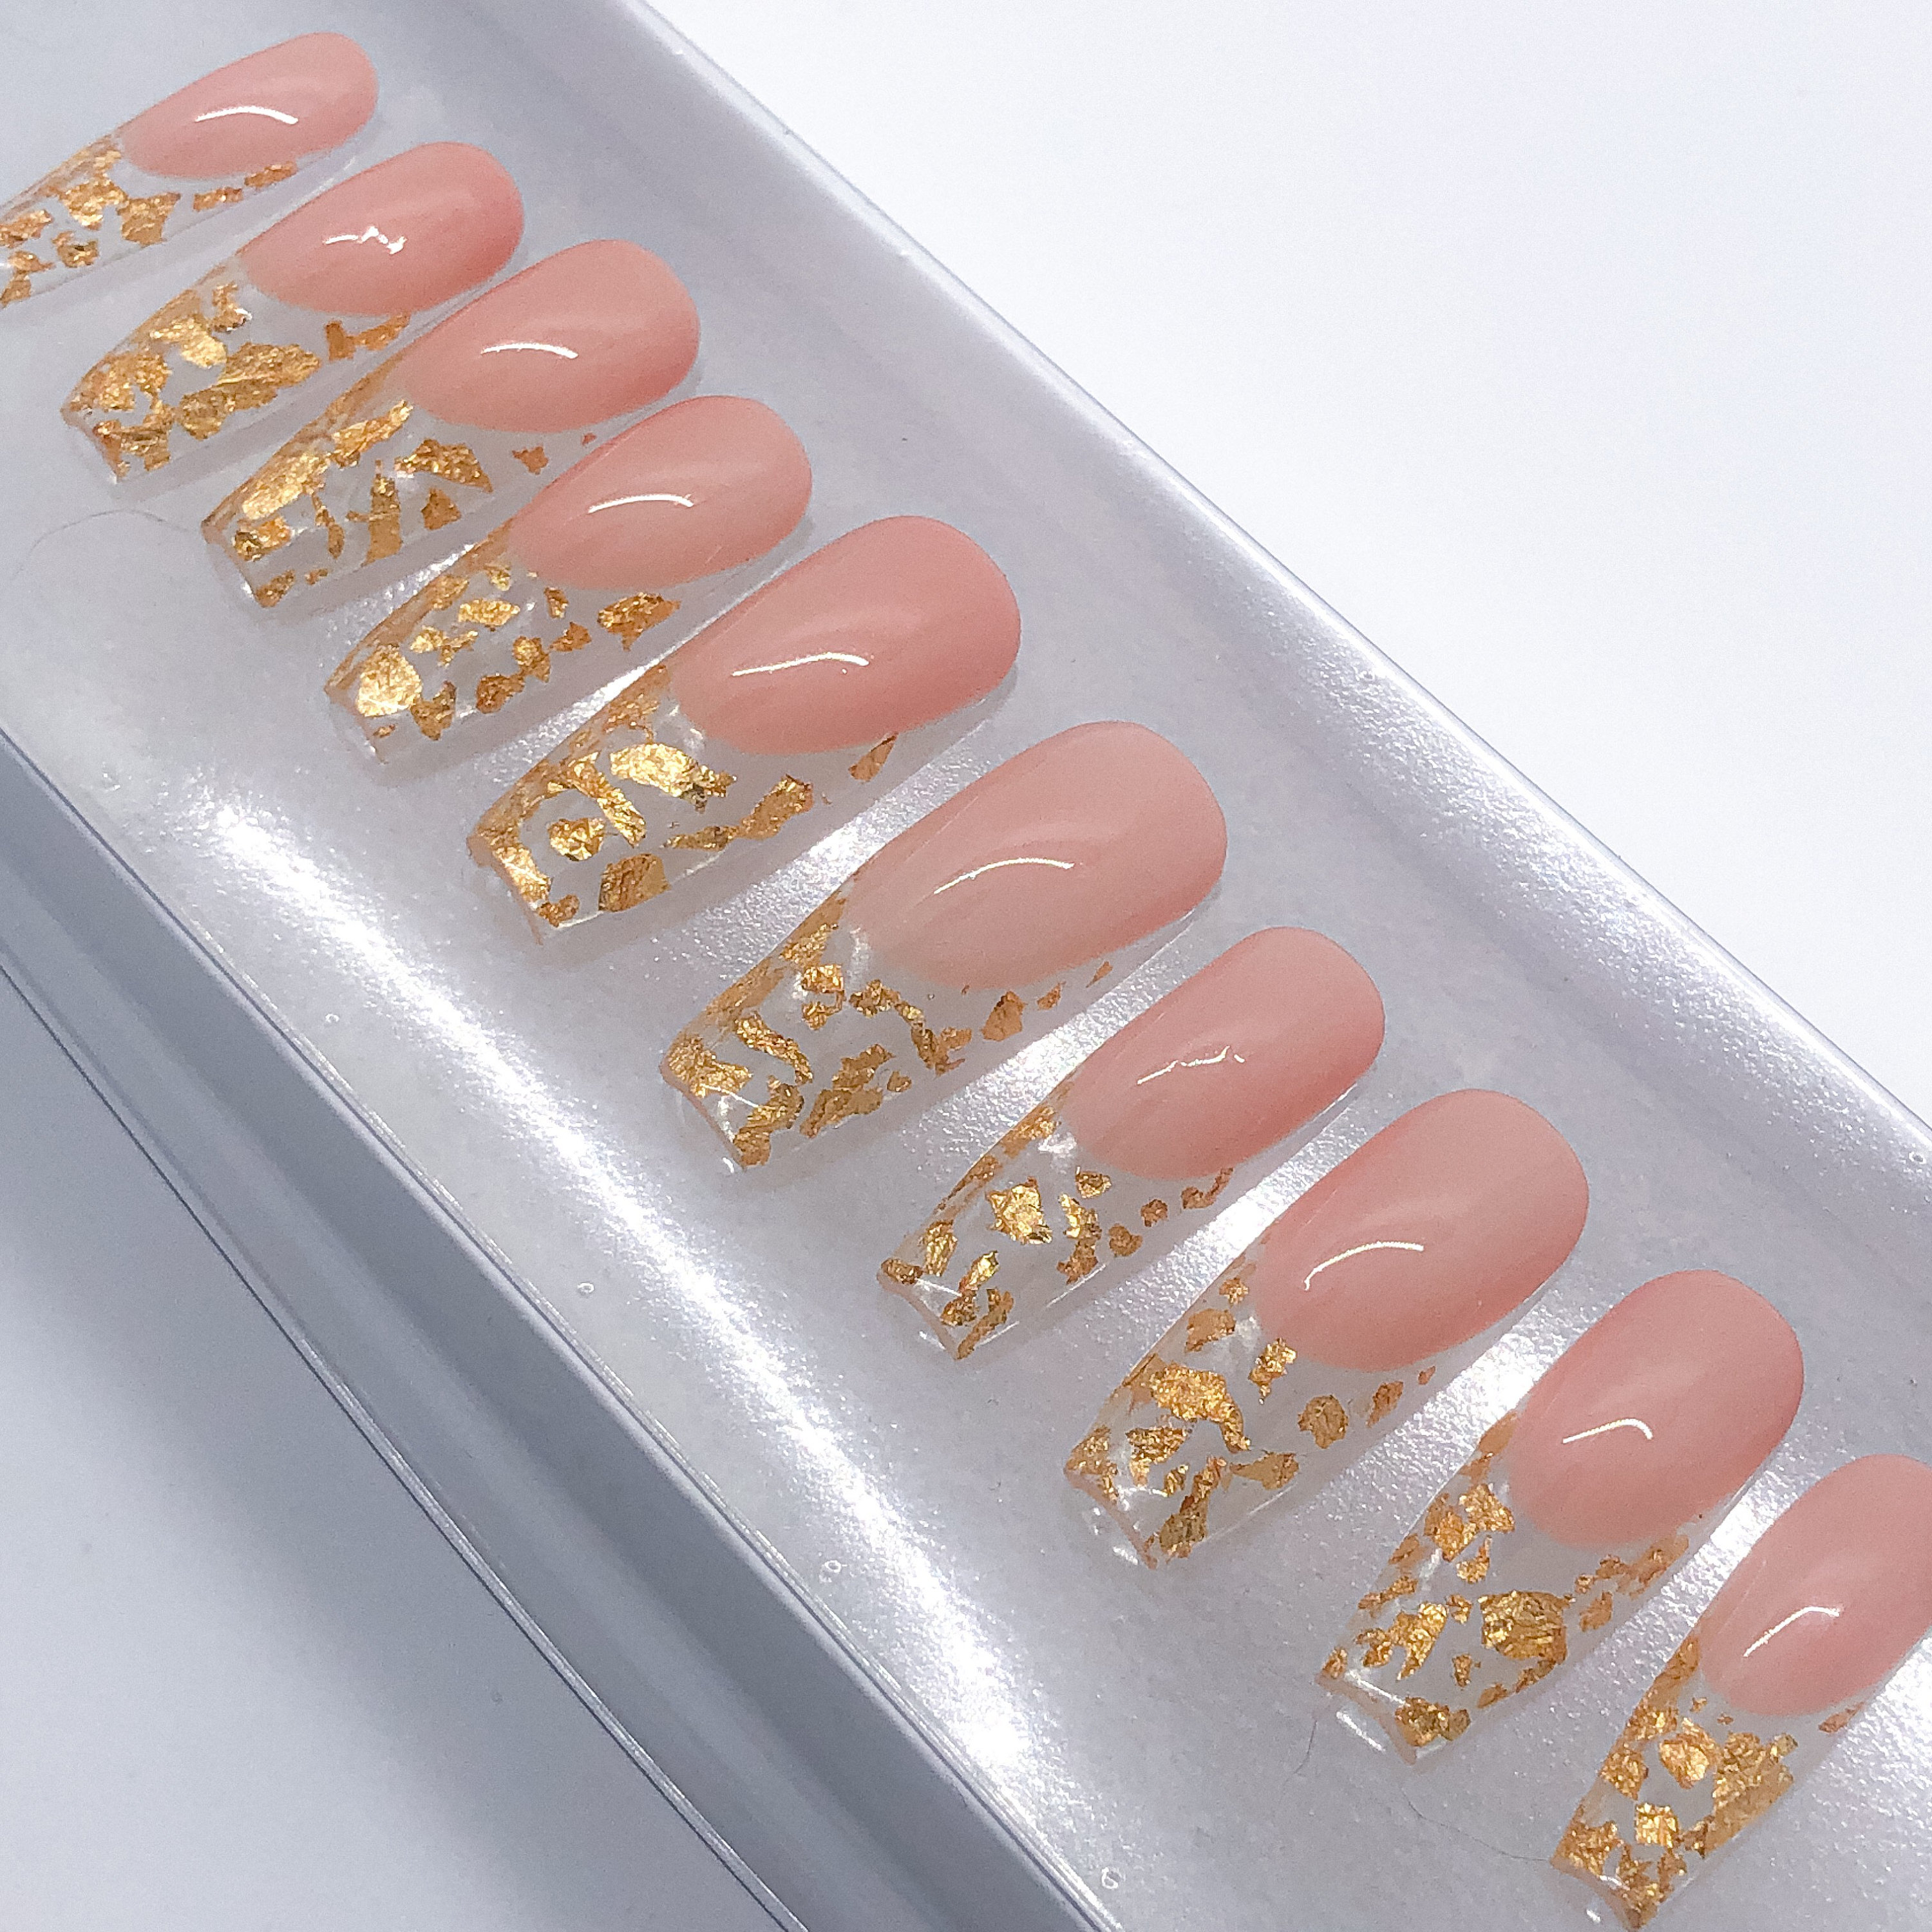 Luxury Wedding Nails Blush Pink With Gold Foil Flakes and Bubble Clear Tips  Press on Nails Set of 10 